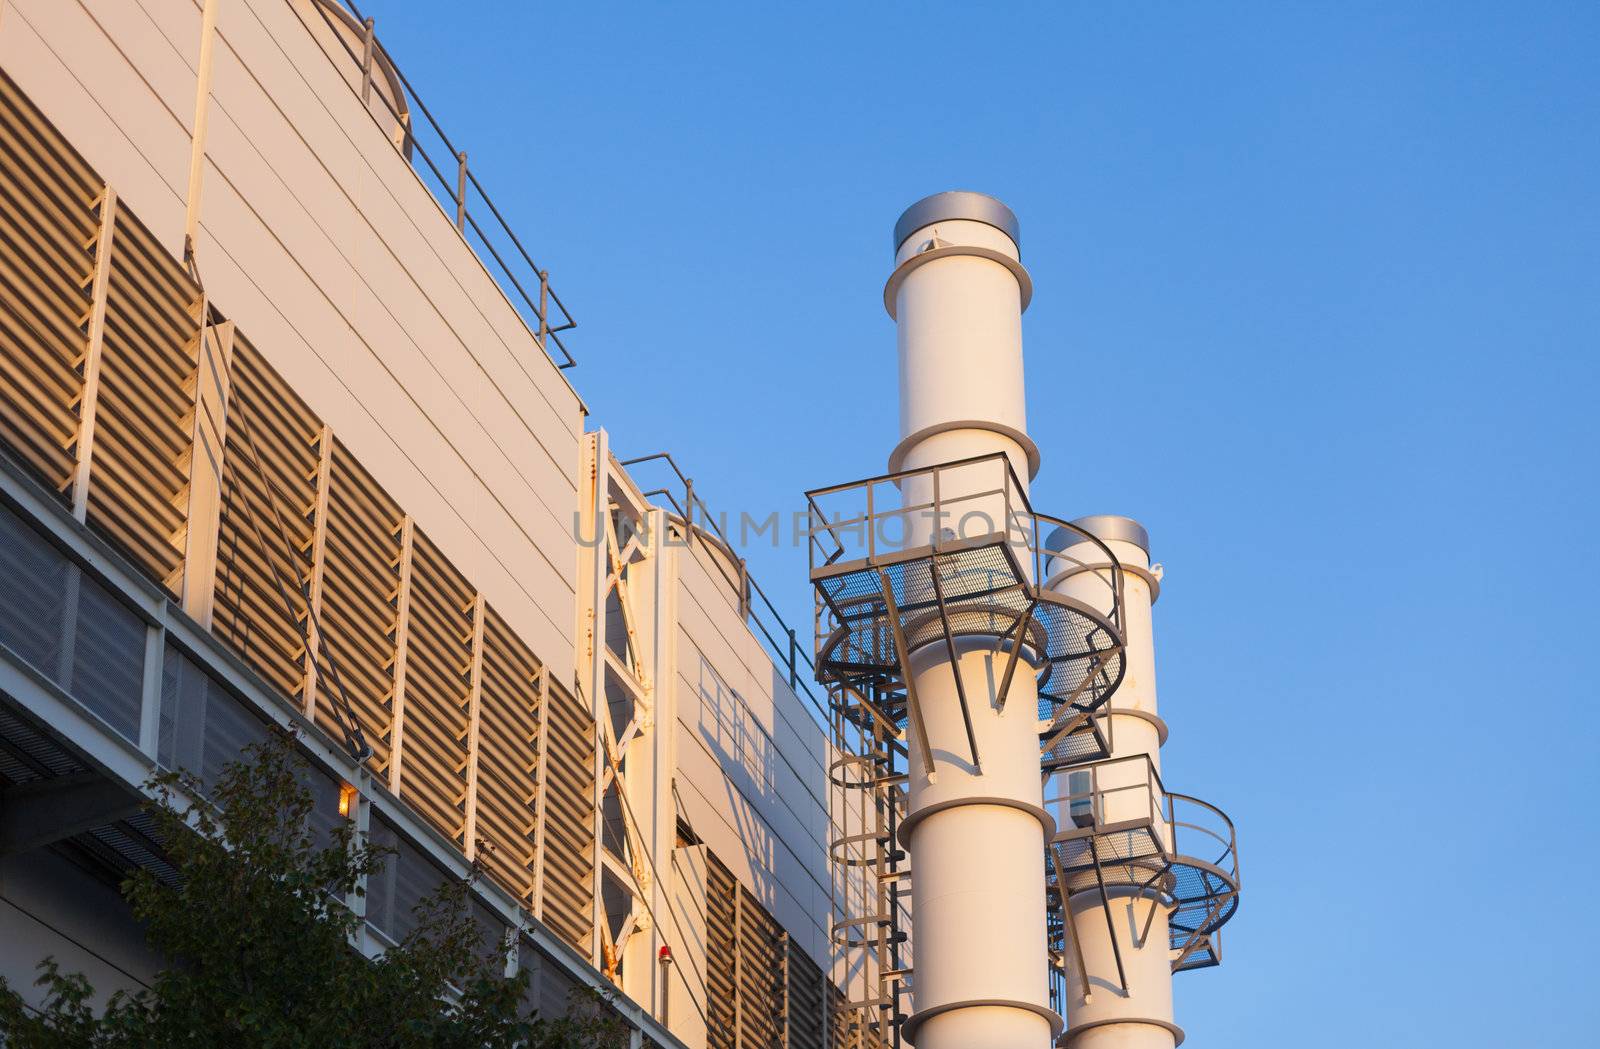 Industiral cooling plant in late afternoon with blue sky